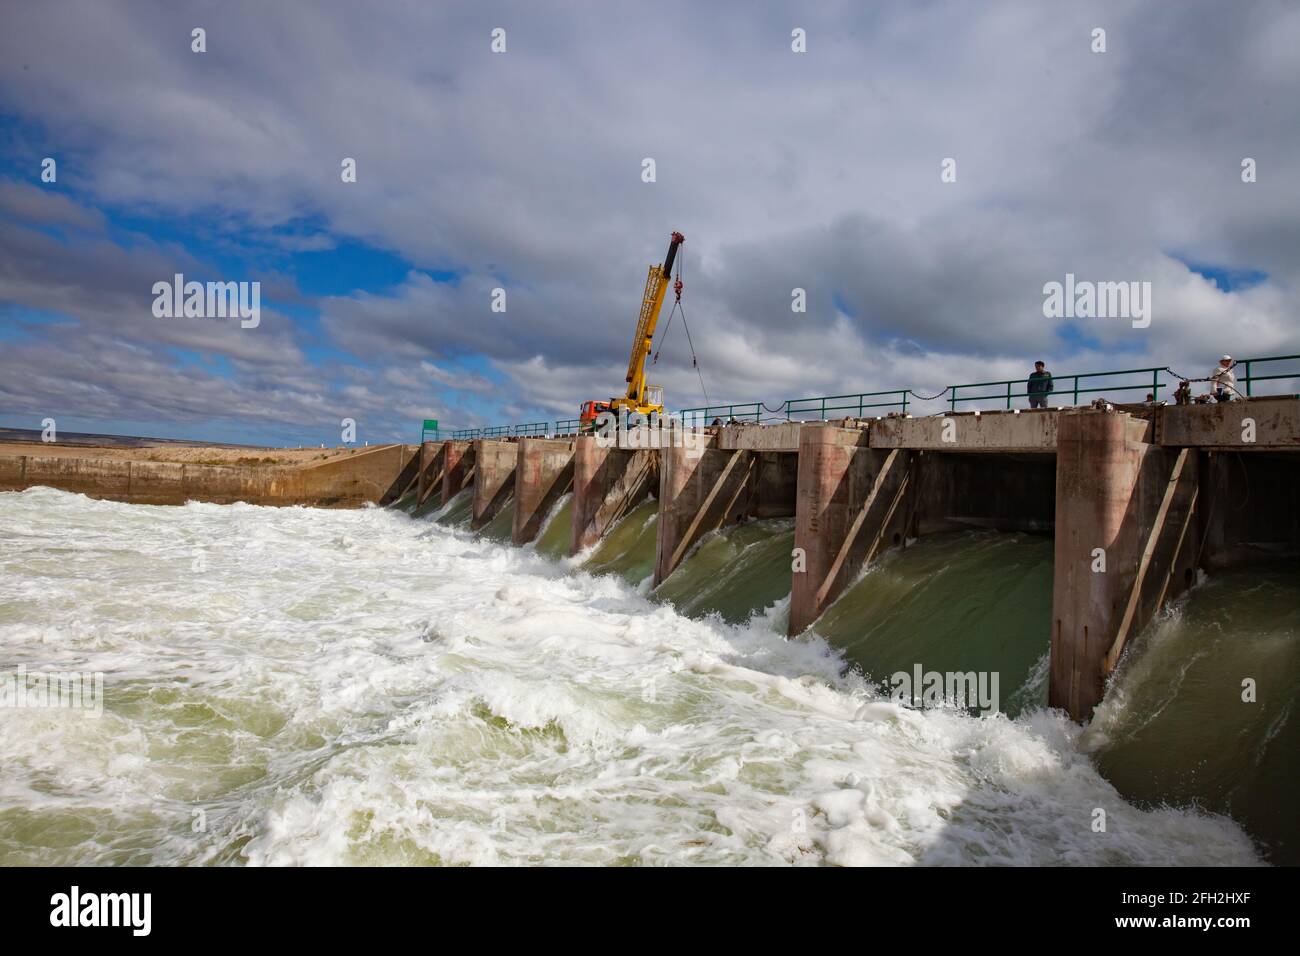 Kazakhstan, small Aral sea Kok-aral dam. Water discharge in flood. Open shutters. Yellow mobile crane and workers on dam. Stock Photo